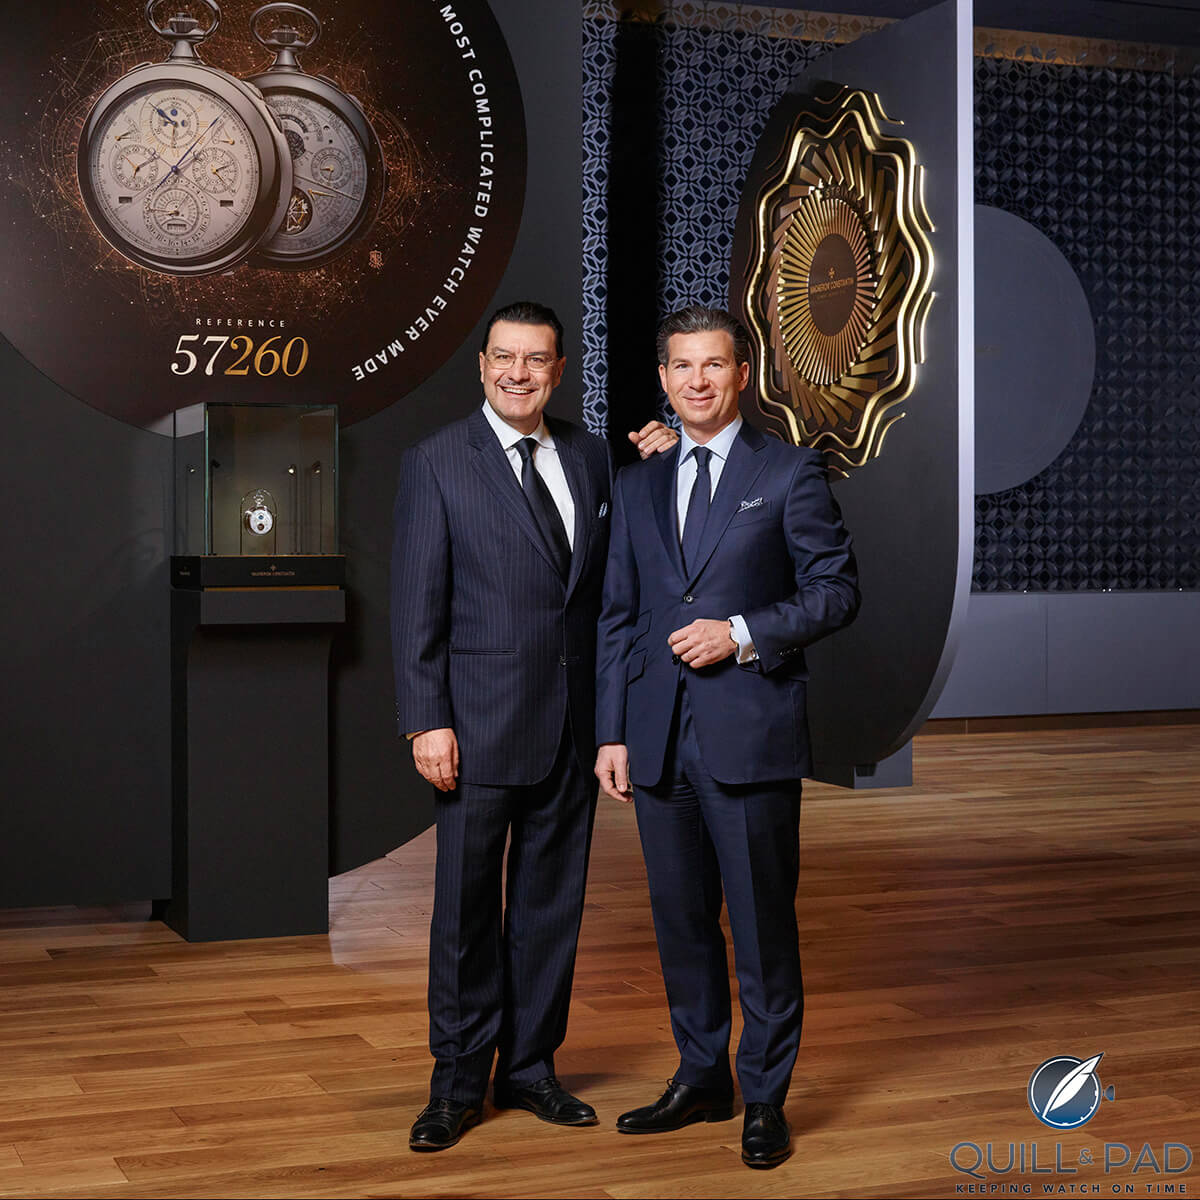 Out going CEO of Vacheron Constantin Juan-Carlos Torres (left) with incoming CEO Louis Ferla